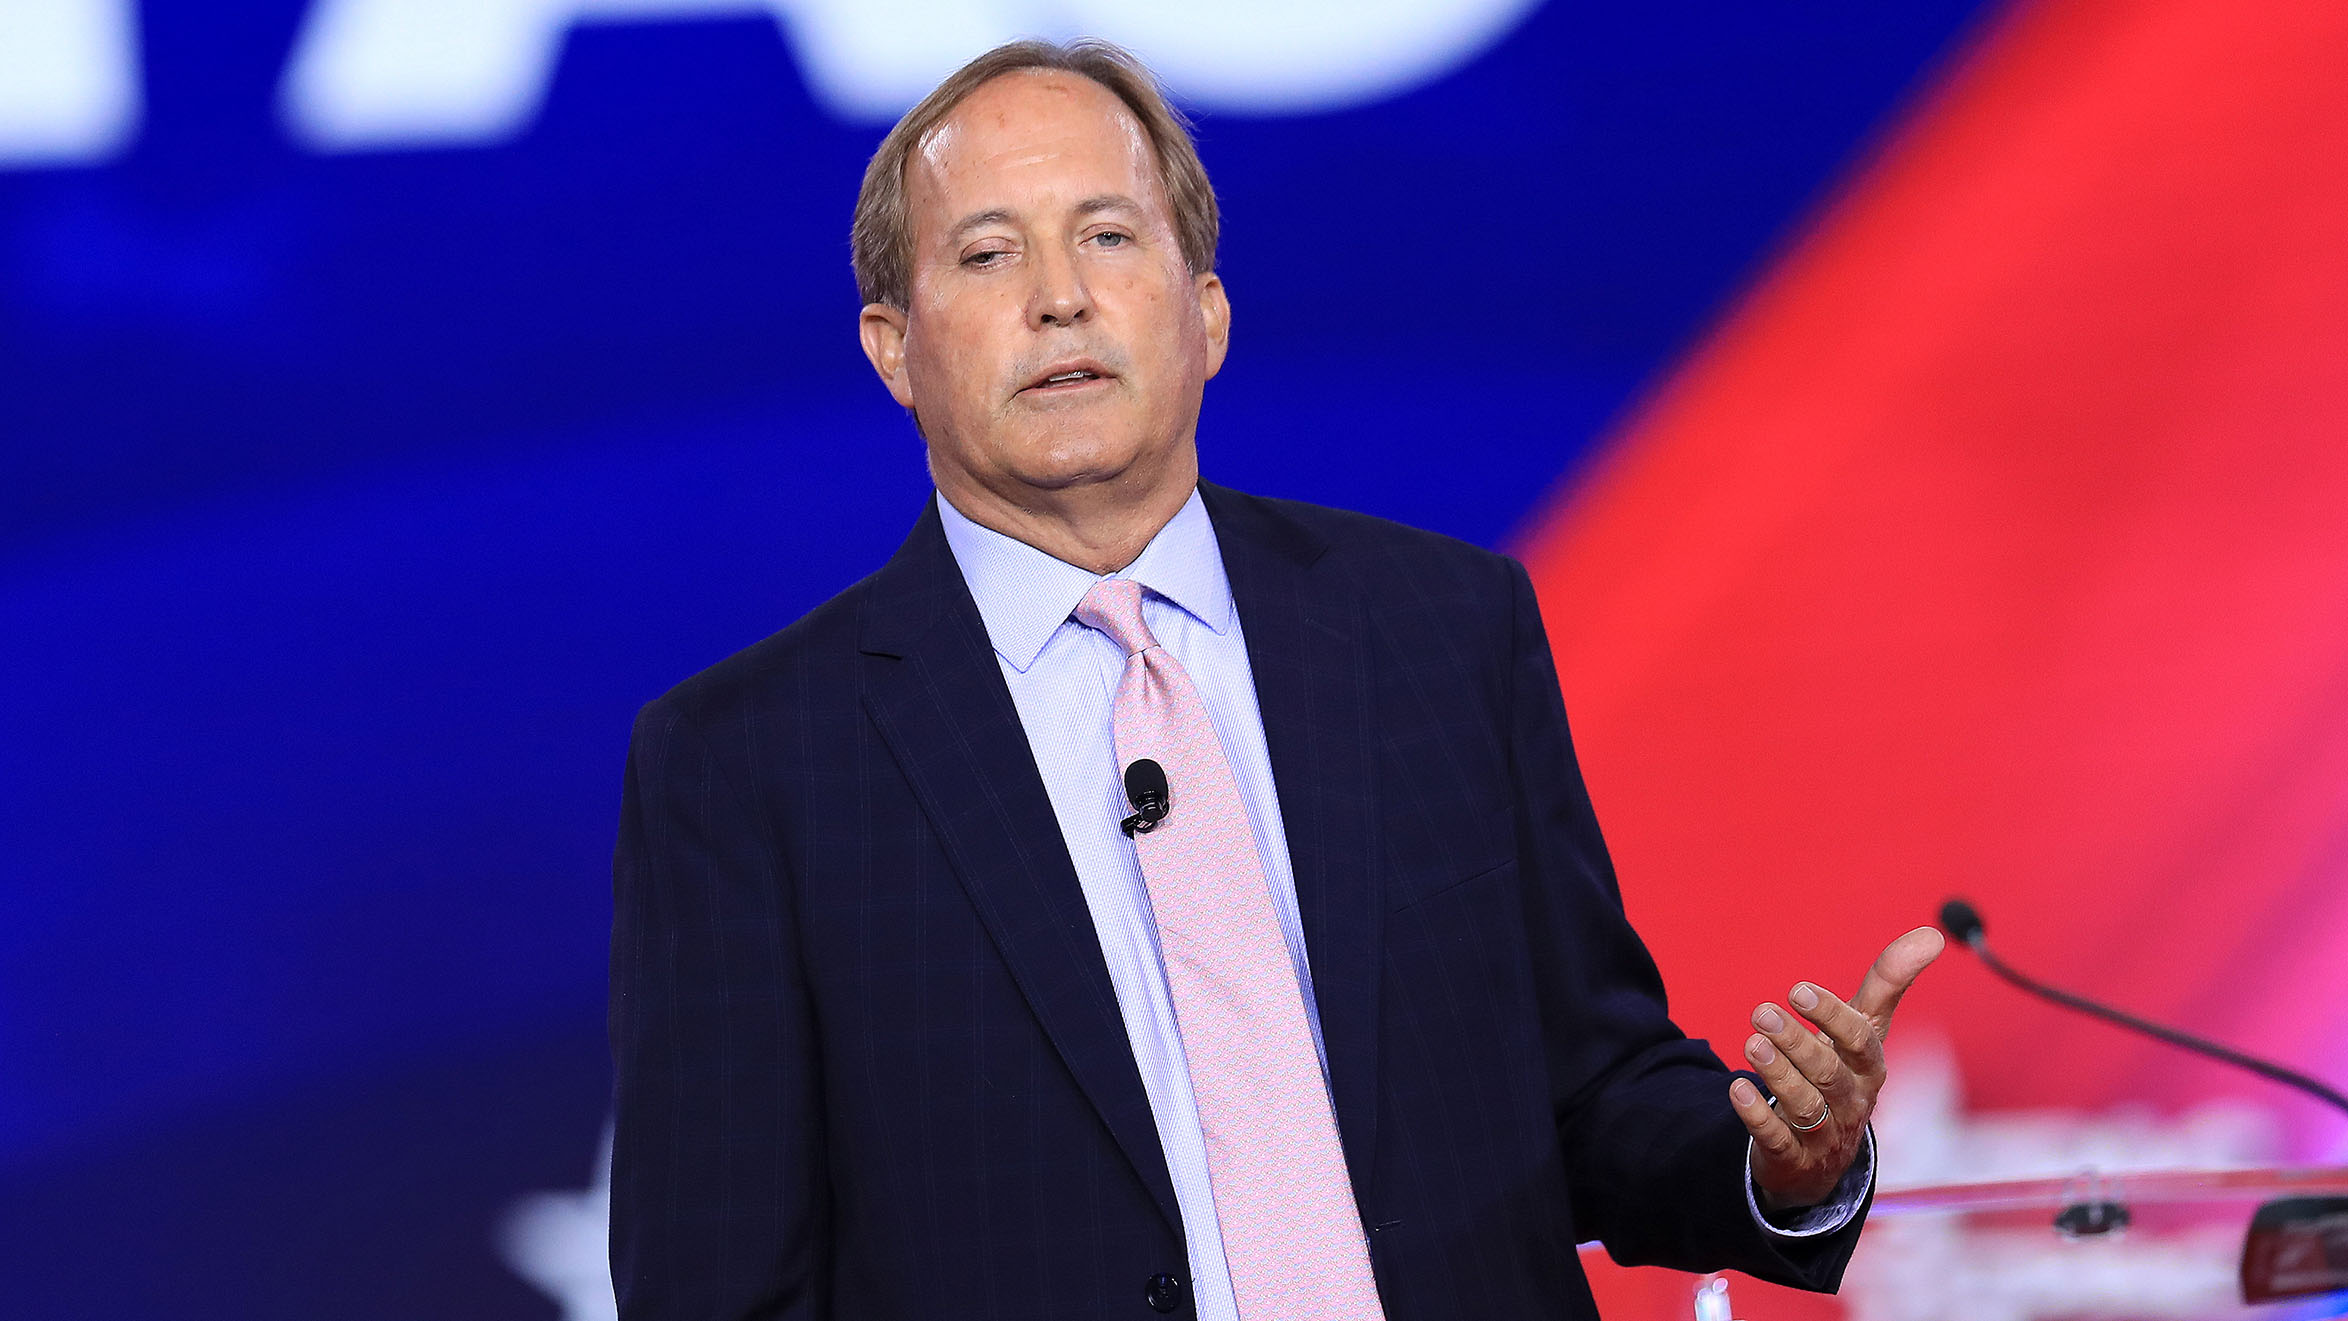 Ken Paxton, Texas Attorney General, impeached and suspended until Senate trial.